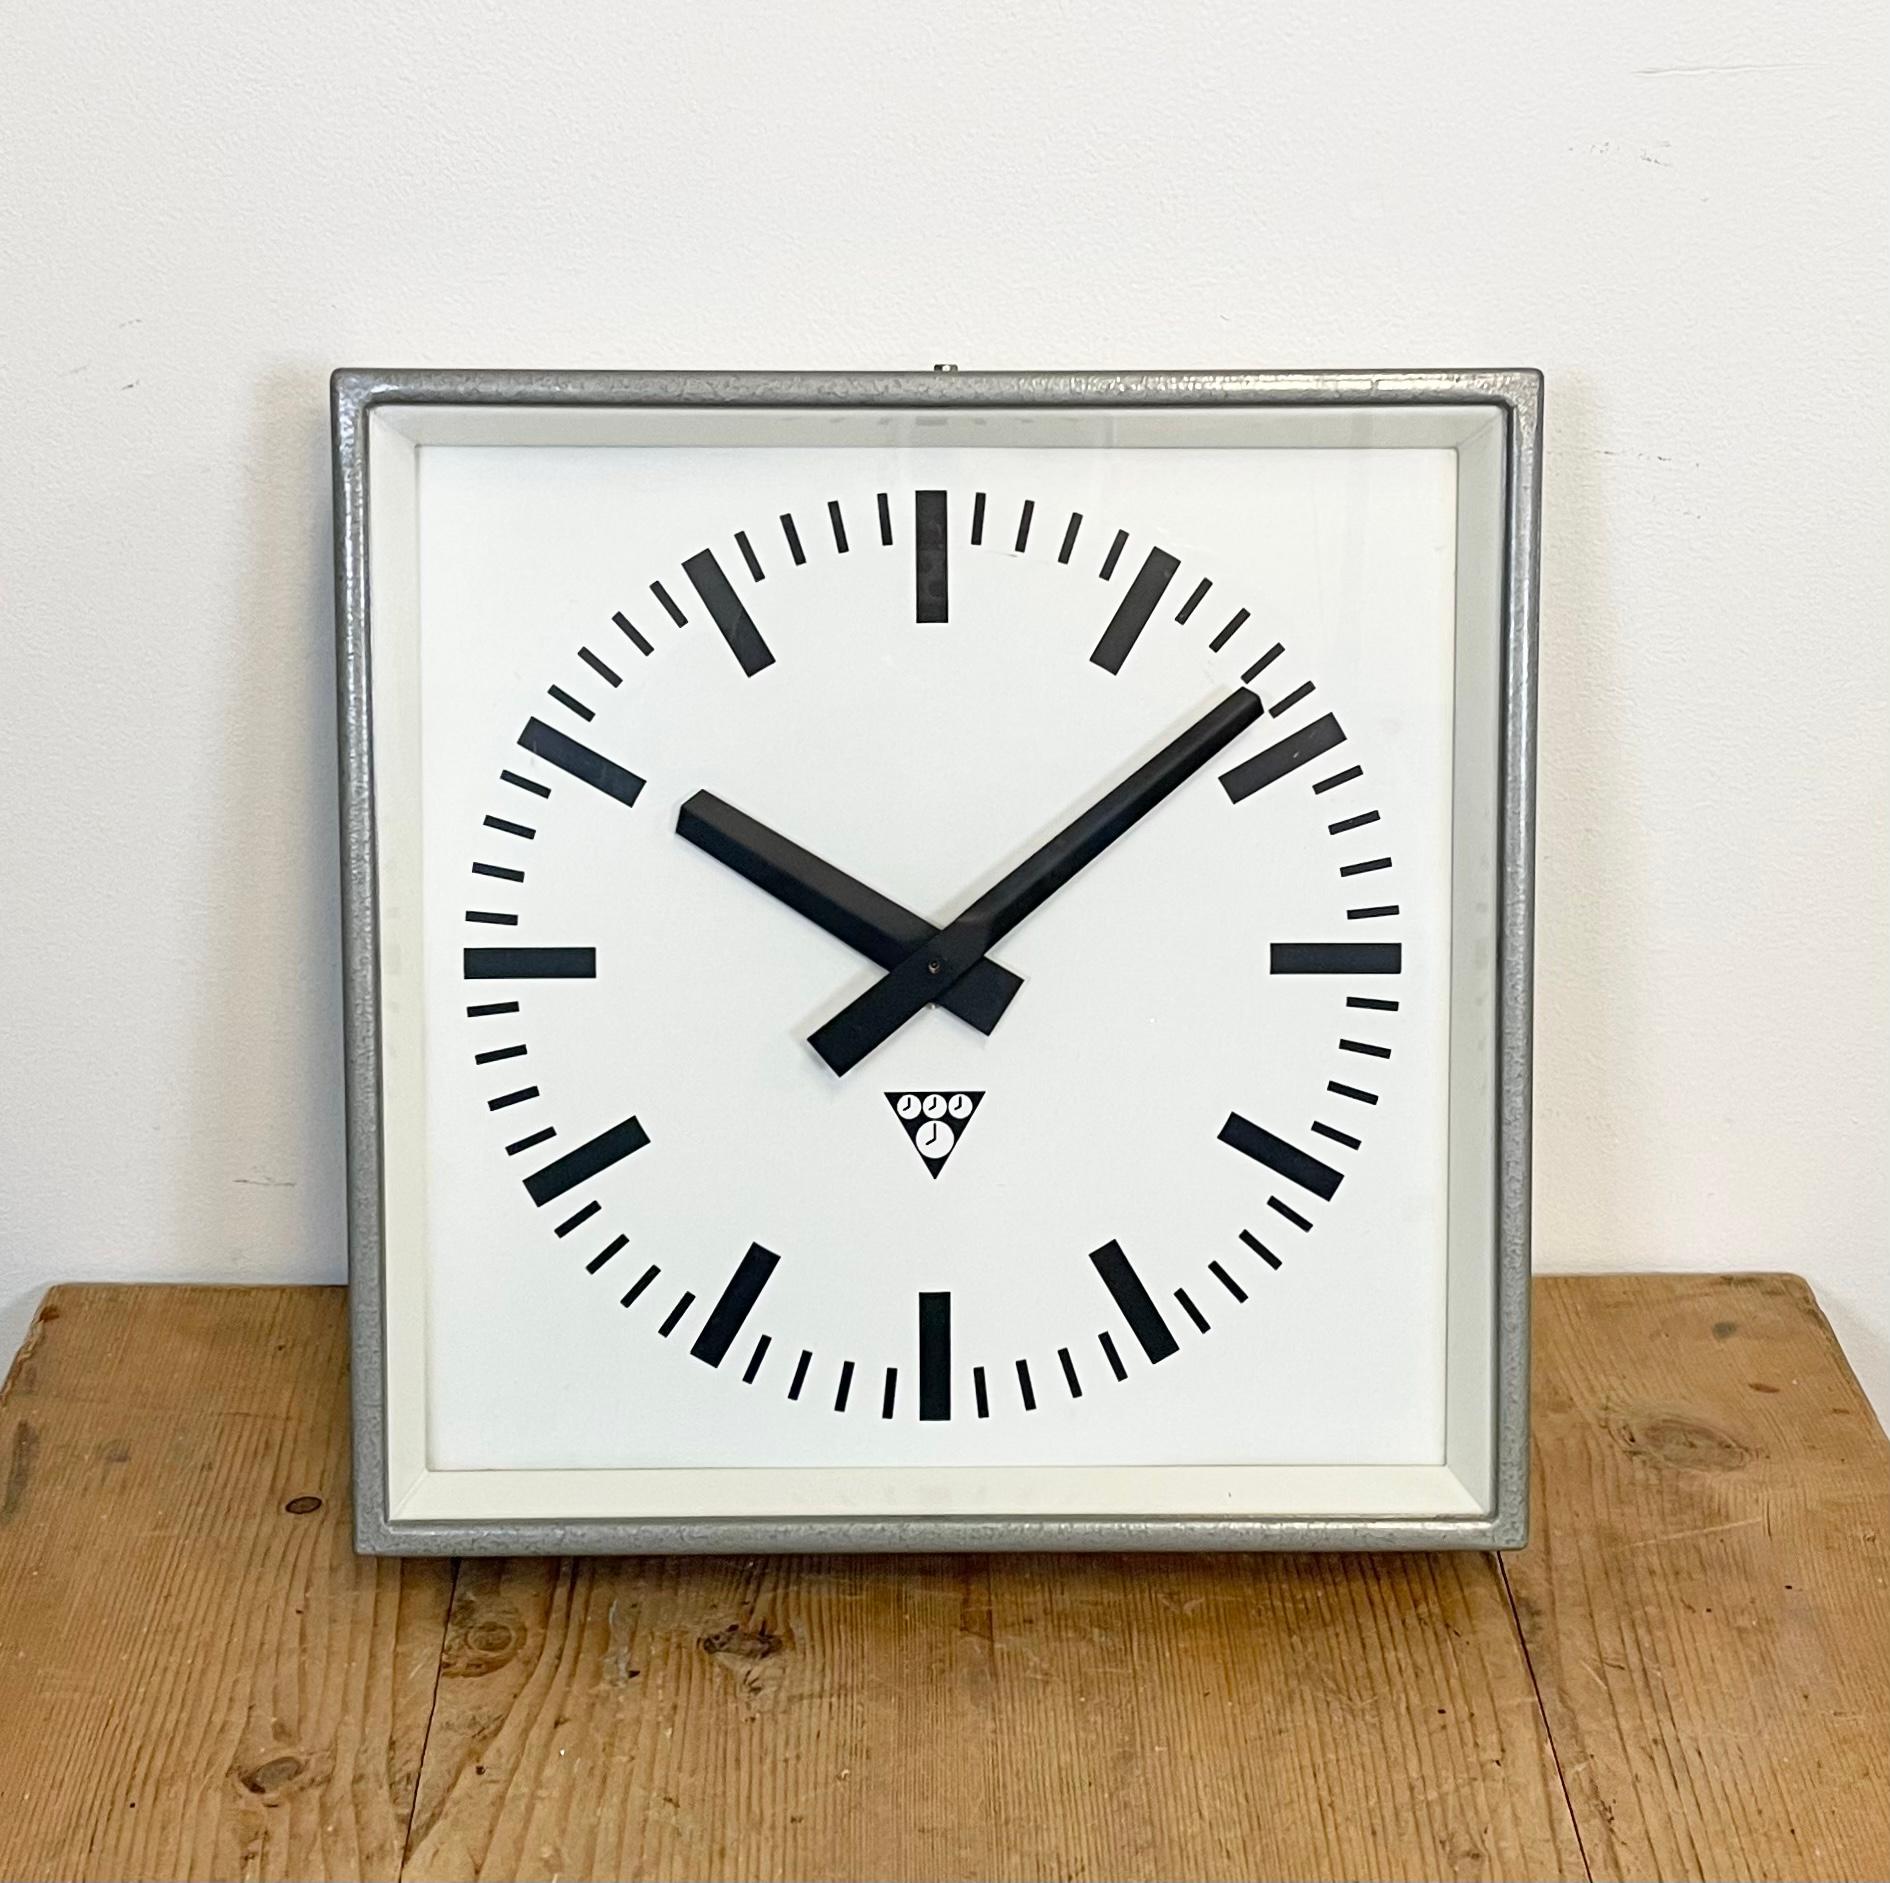 Clock made by Pragotron in former Czechoslovakia during the 1970s.Was used in factories, schools and railway stations. Silver-grey hammerpaint body , aluminium dial and clear glass cover.
This item has been converted into a battery-powered